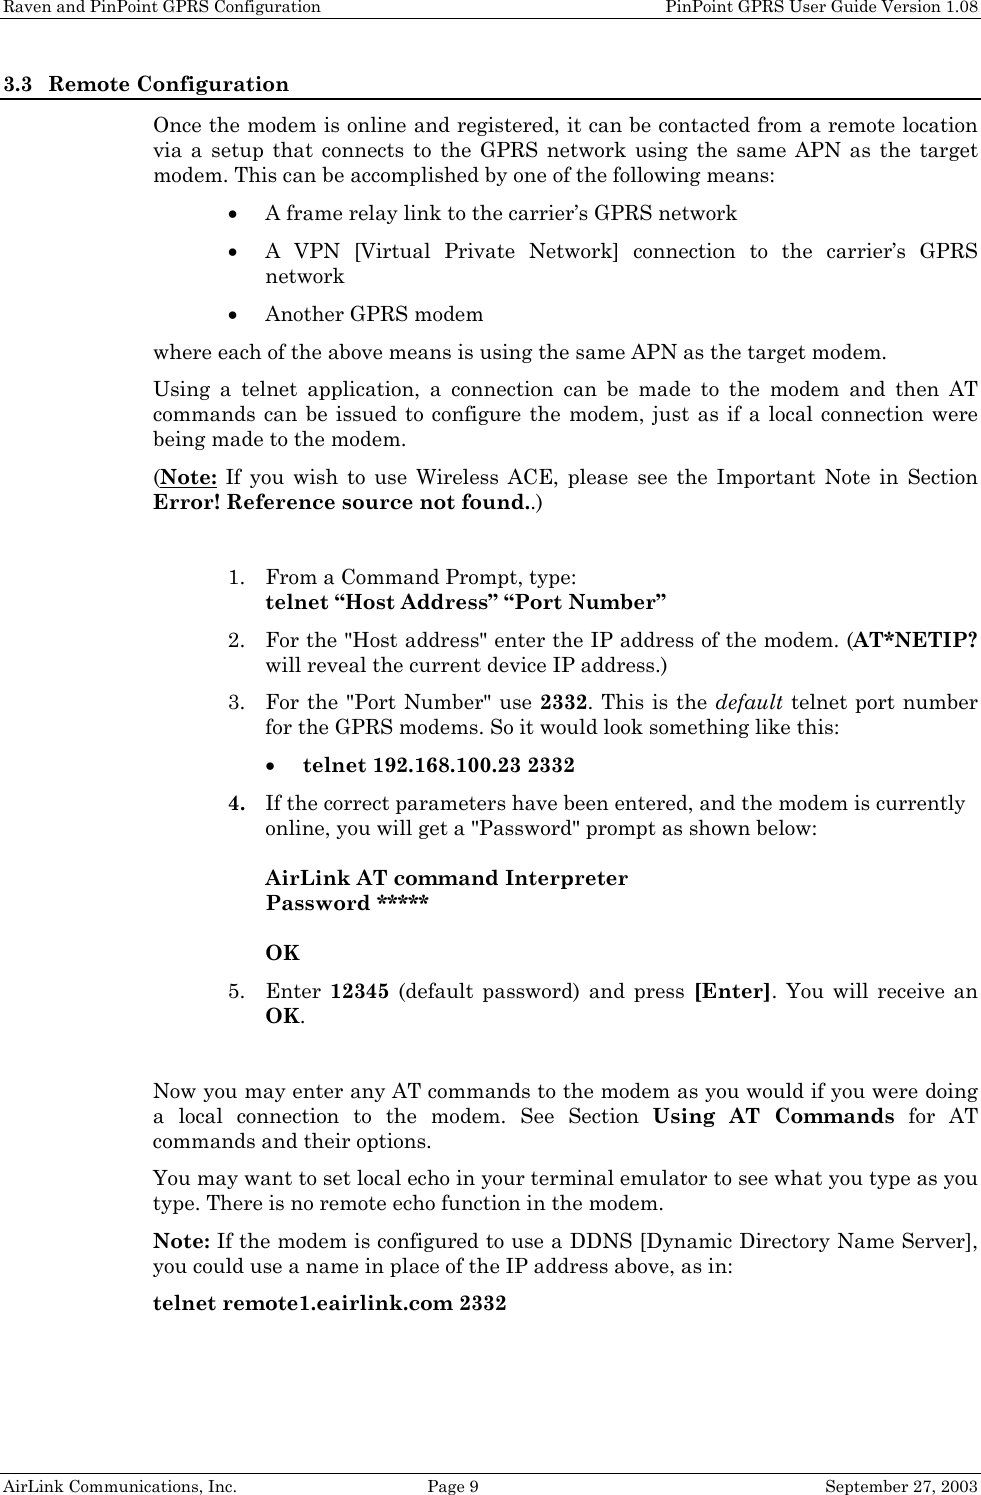 Raven and PinPoint GPRS Configuration    PinPoint GPRS User Guide Version 1.08 AirLink Communications, Inc.  Page 9  September 27, 2003 3.3 Remote Configuration Once the modem is online and registered, it can be contacted from a remote location via a setup that connects to the GPRS network using the same APN as the target modem. This can be accomplished by one of the following means: • A frame relay link to the carrier’s GPRS network • A VPN [Virtual Private Network] connection to the carrier’s GPRS network • Another GPRS modem where each of the above means is using the same APN as the target modem. Using a telnet application, a connection can be made to the modem and then AT commands can be issued to configure the modem, just as if a local connection were being made to the modem. (Note: If you wish to use Wireless ACE, please see the Important Note in Section Error! Reference source not found..)  1. From a Command Prompt, type: telnet “Host Address” “Port Number” 2. For the &quot;Host address&quot; enter the IP address of the modem. (AT*NETIP? will reveal the current device IP address.) 3. For the &quot;Port Number&quot; use 2332. This is the default telnet port number for the GPRS modems. So it would look something like this: • telnet 192.168.100.23 2332 4. If the correct parameters have been entered, and the modem is currently online, you will get a &quot;Password&quot; prompt as shown below:  AirLink AT command Interpreter Password *****  OK 5. Enter  12345 (default password) and press [Enter]. You will receive an OK.  Now you may enter any AT commands to the modem as you would if you were doing a local connection to the modem. See Section Using AT Commands for AT commands and their options. You may want to set local echo in your terminal emulator to see what you type as you type. There is no remote echo function in the modem. Note: If the modem is configured to use a DDNS [Dynamic Directory Name Server], you could use a name in place of the IP address above, as in: telnet remote1.eairlink.com 2332  